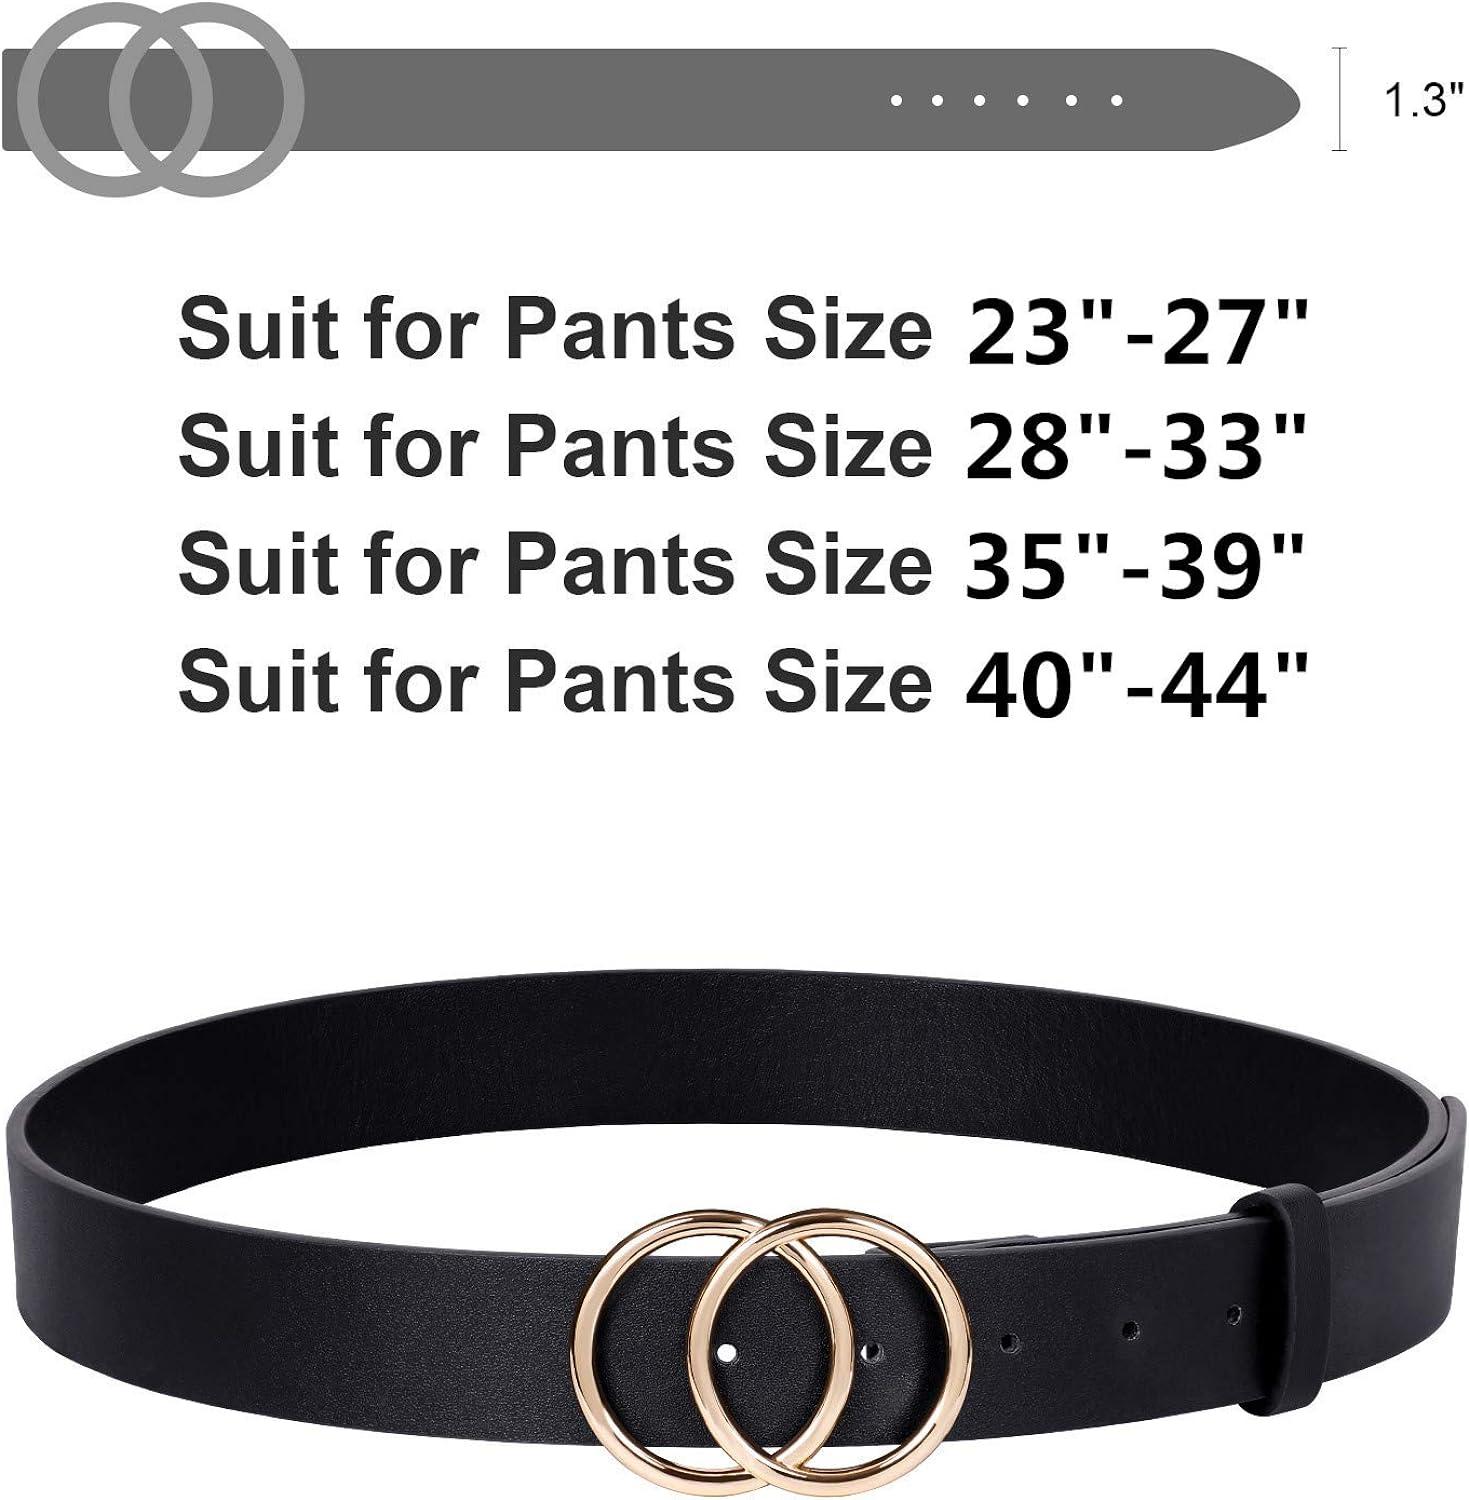 JASGOOD 3 Pack Women Leather Belt for Jeans Pants Ladies Waist Belts with  Double O-Ring Buckle Fit Pants Size 28-33 A-black+leopard+brown